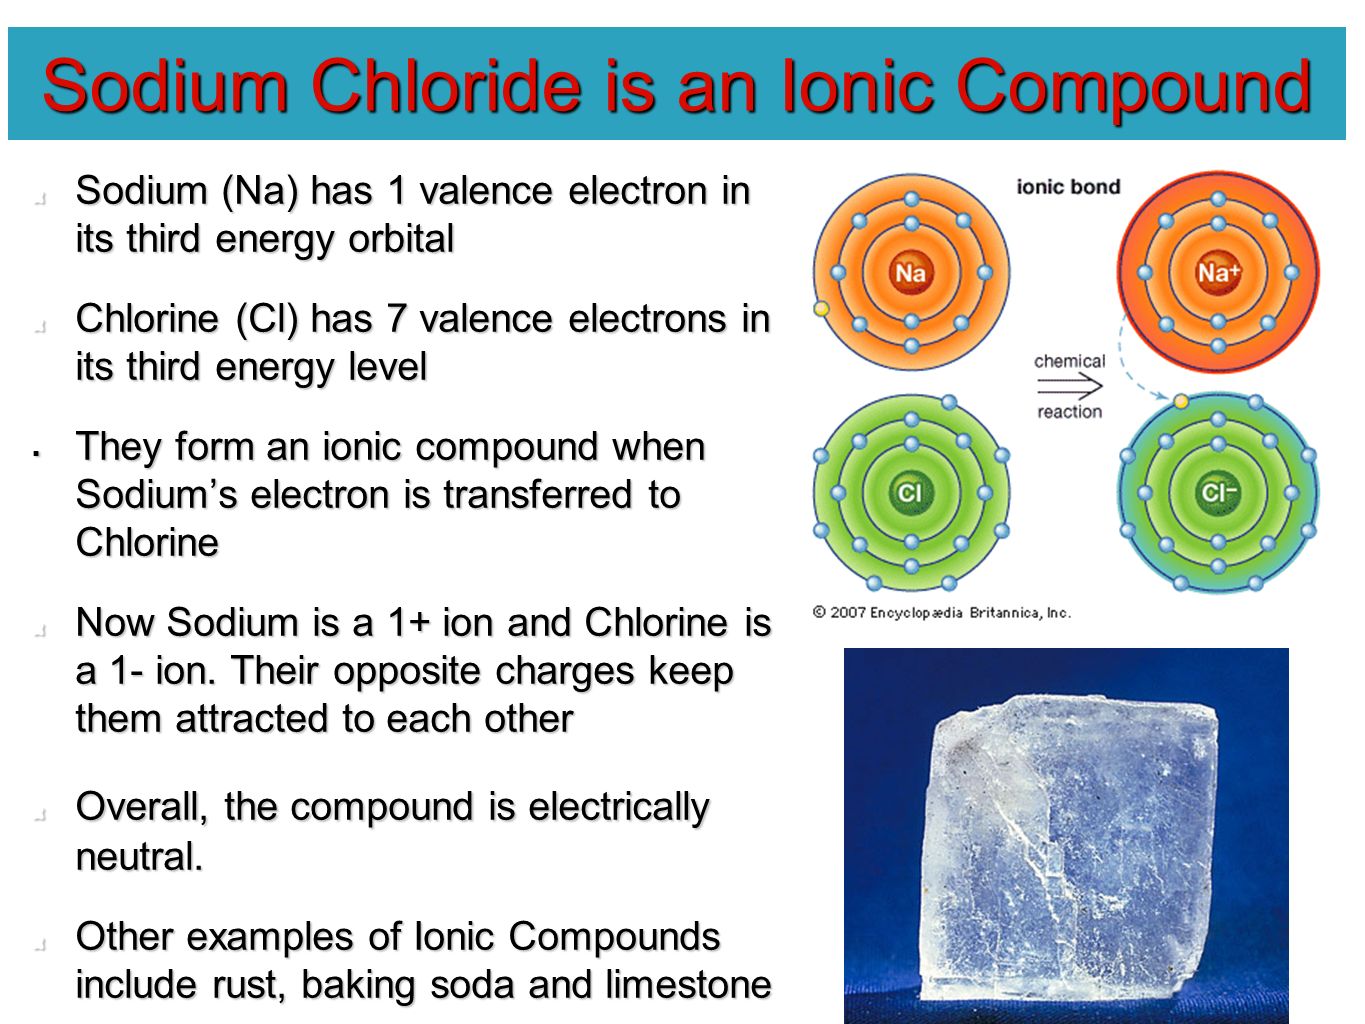 Sodium Chloride is an Ionic Compound Sodium (Na) has 1 valence electron in its third energy orbital Chlorine (Cl) has 7 valence electrons in its third energy level  They form an ionic compound when Sodium’s electron is transferred to Chlorine Now Sodium is a 1+ ion and Chlorine is a 1- ion.